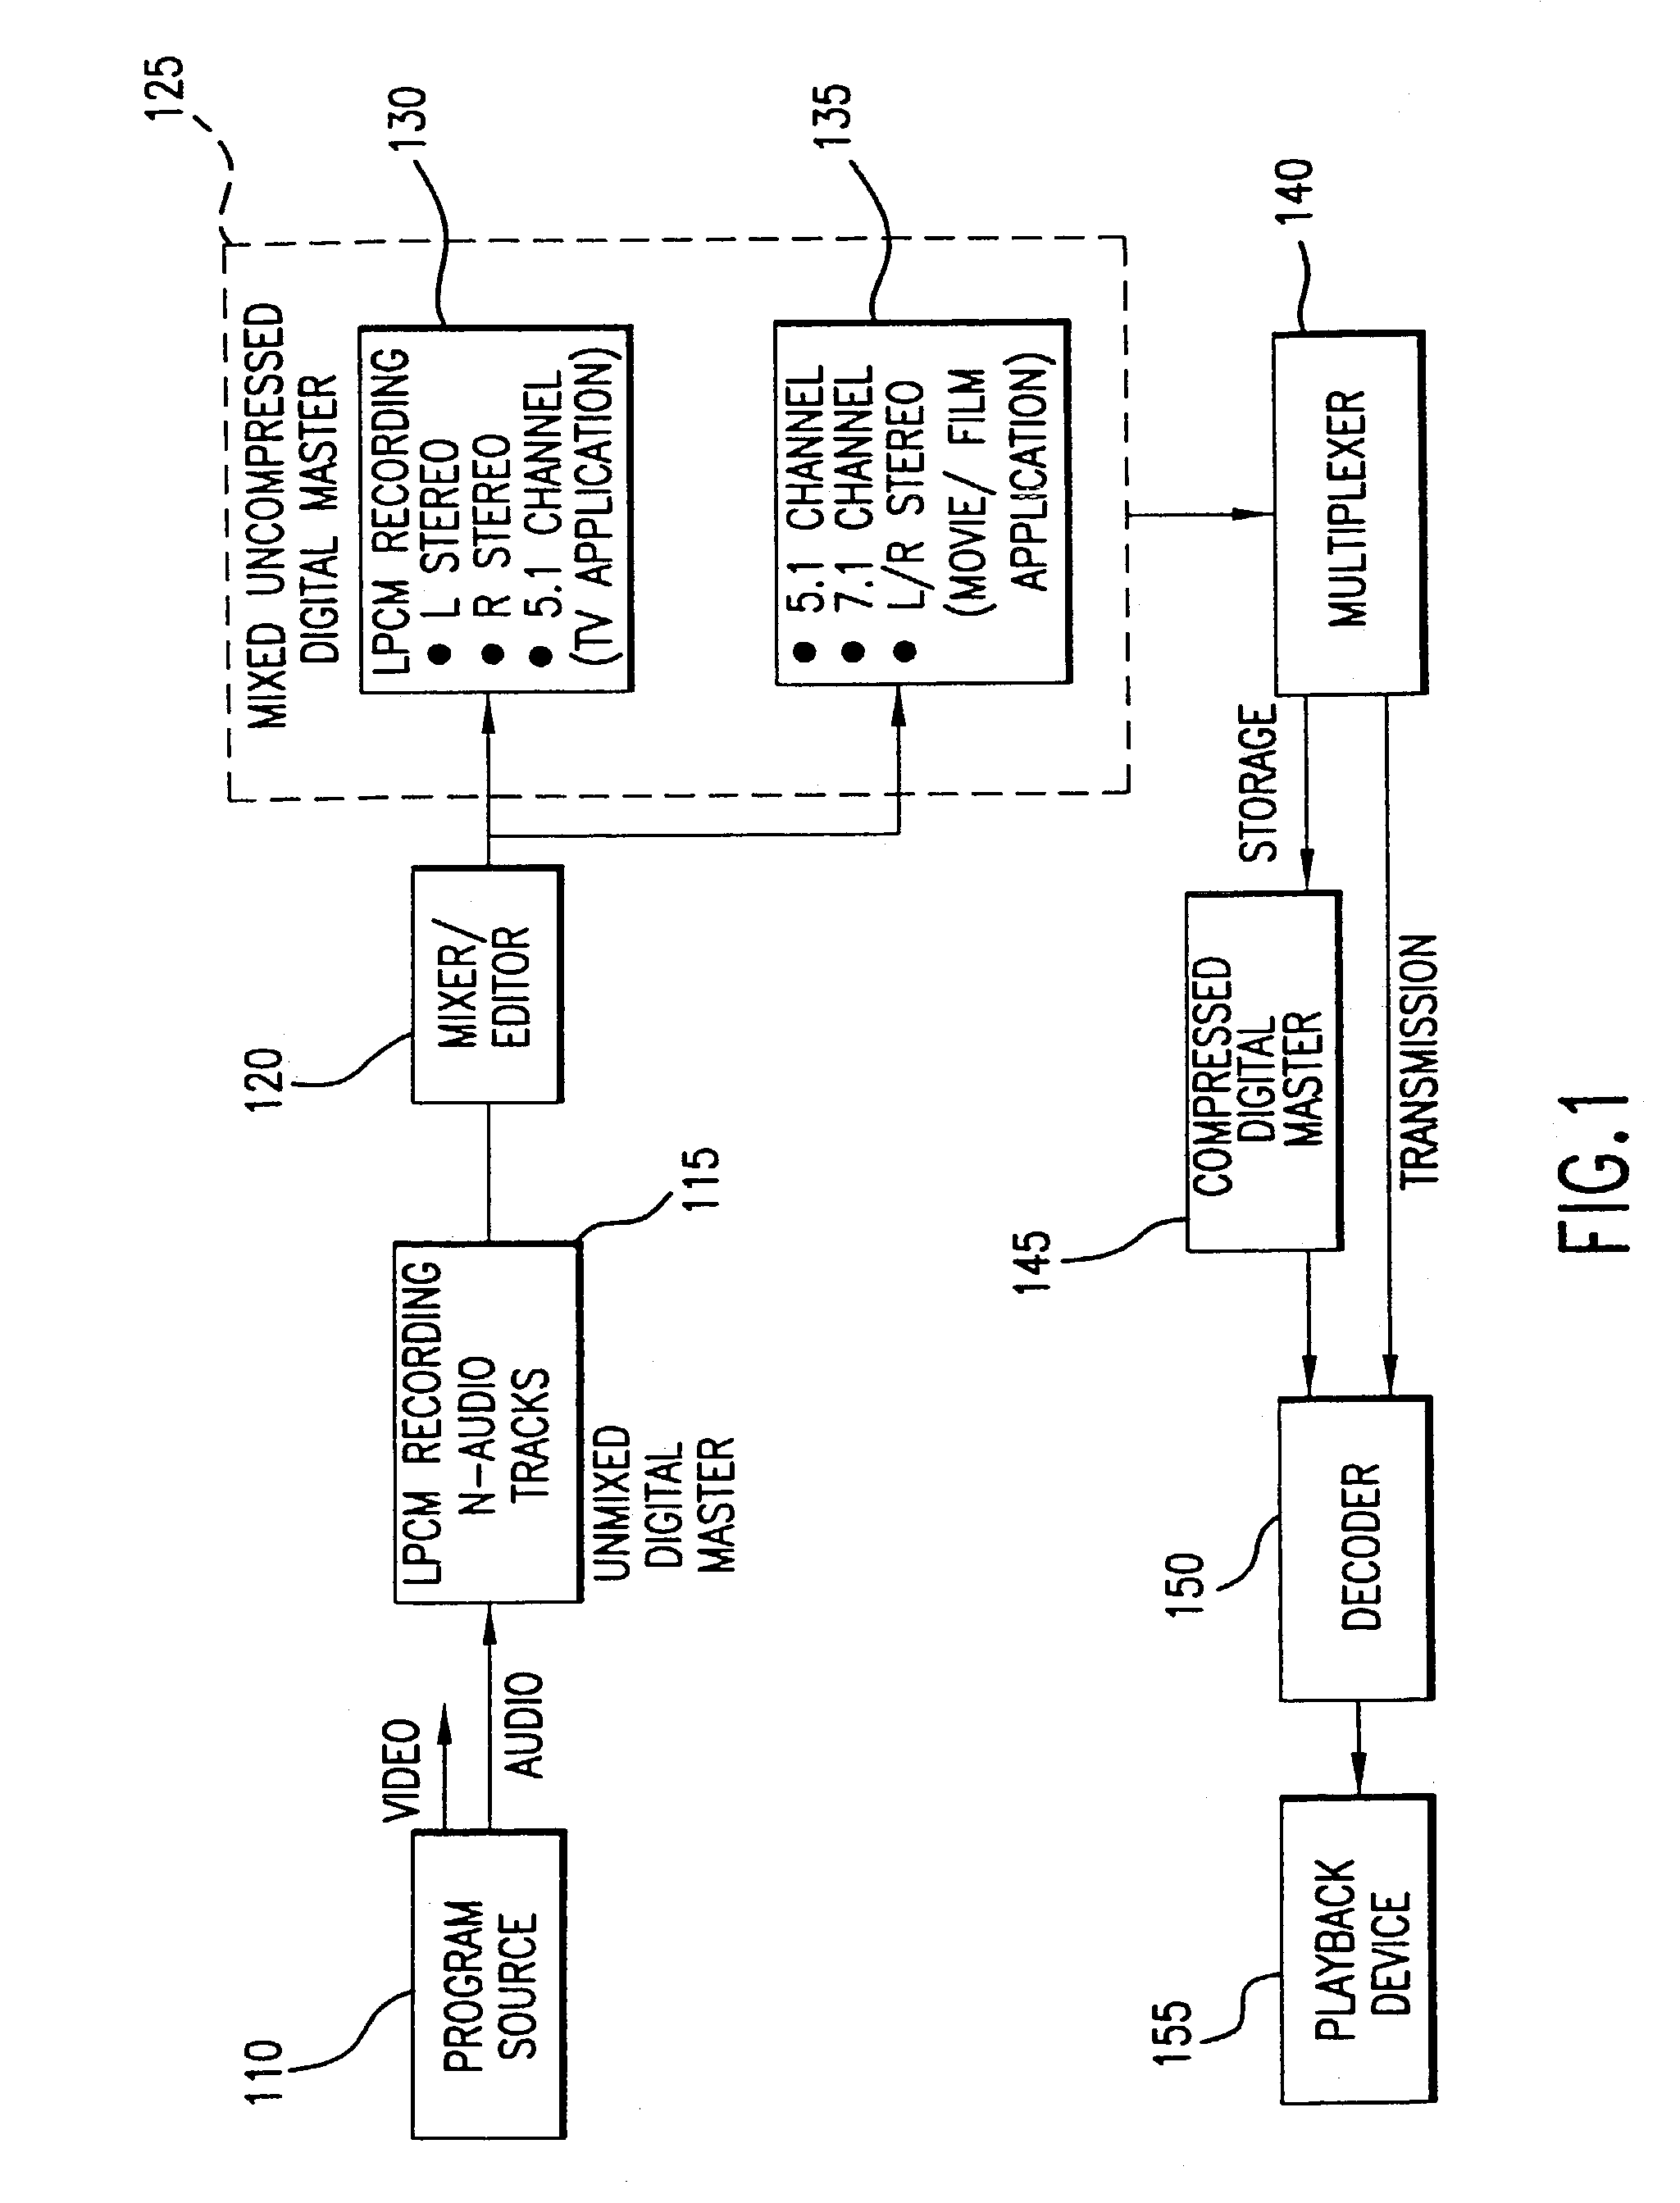 Method and apparatus for accommodating primary content audio and secondary content remaining audio capability in the digital audio production process